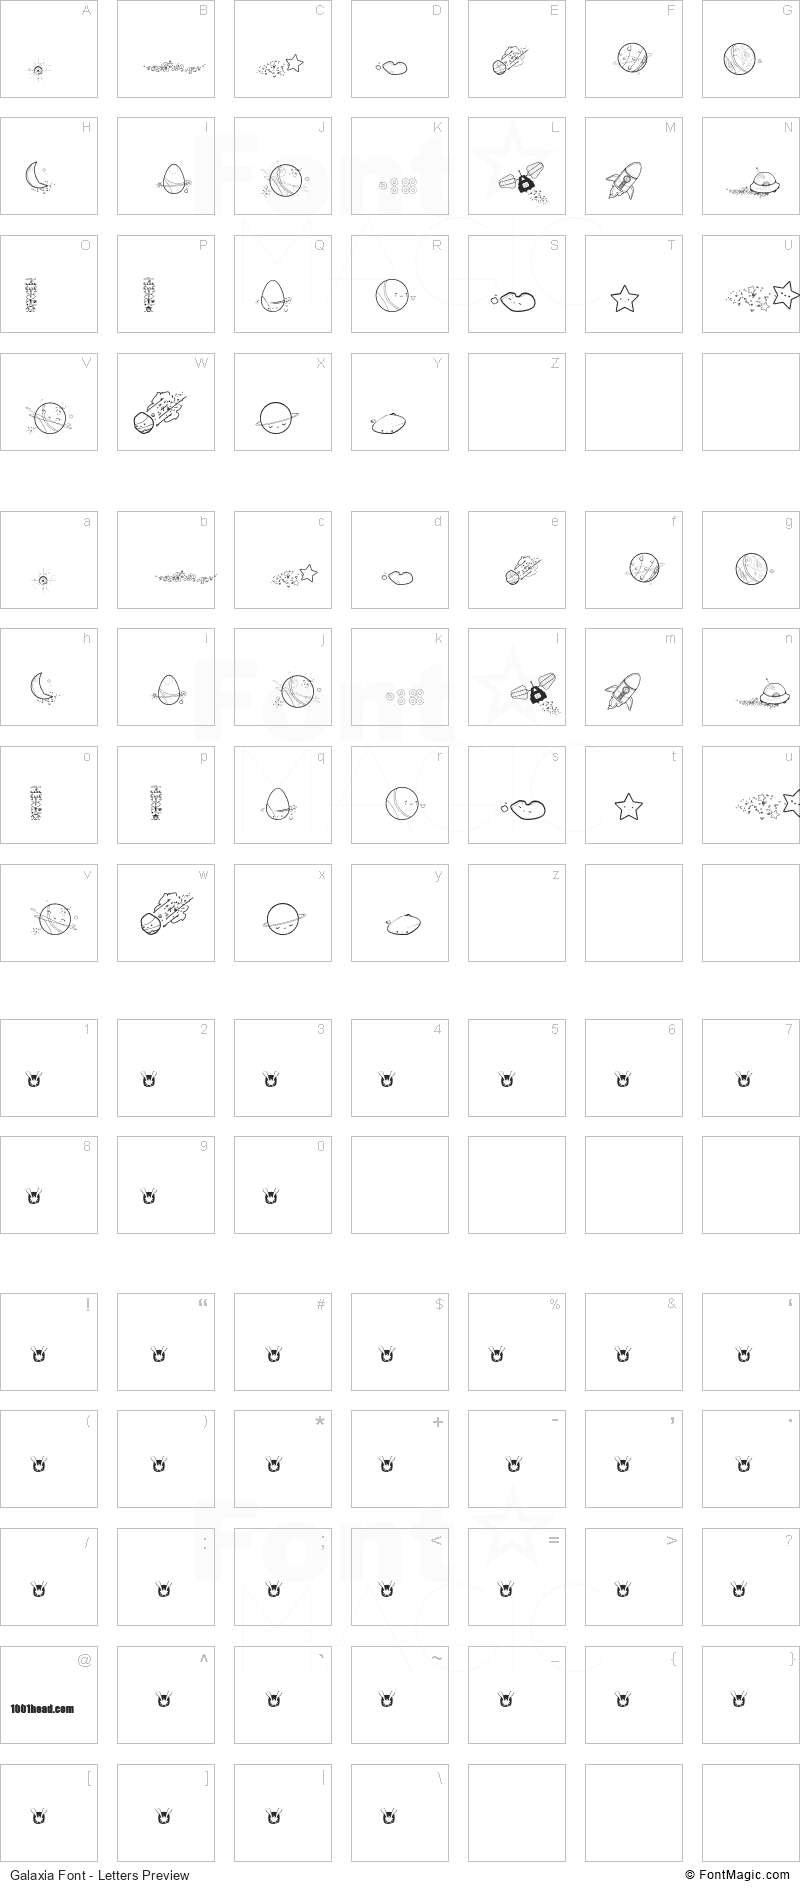 Galaxia Font - All Latters Preview Chart